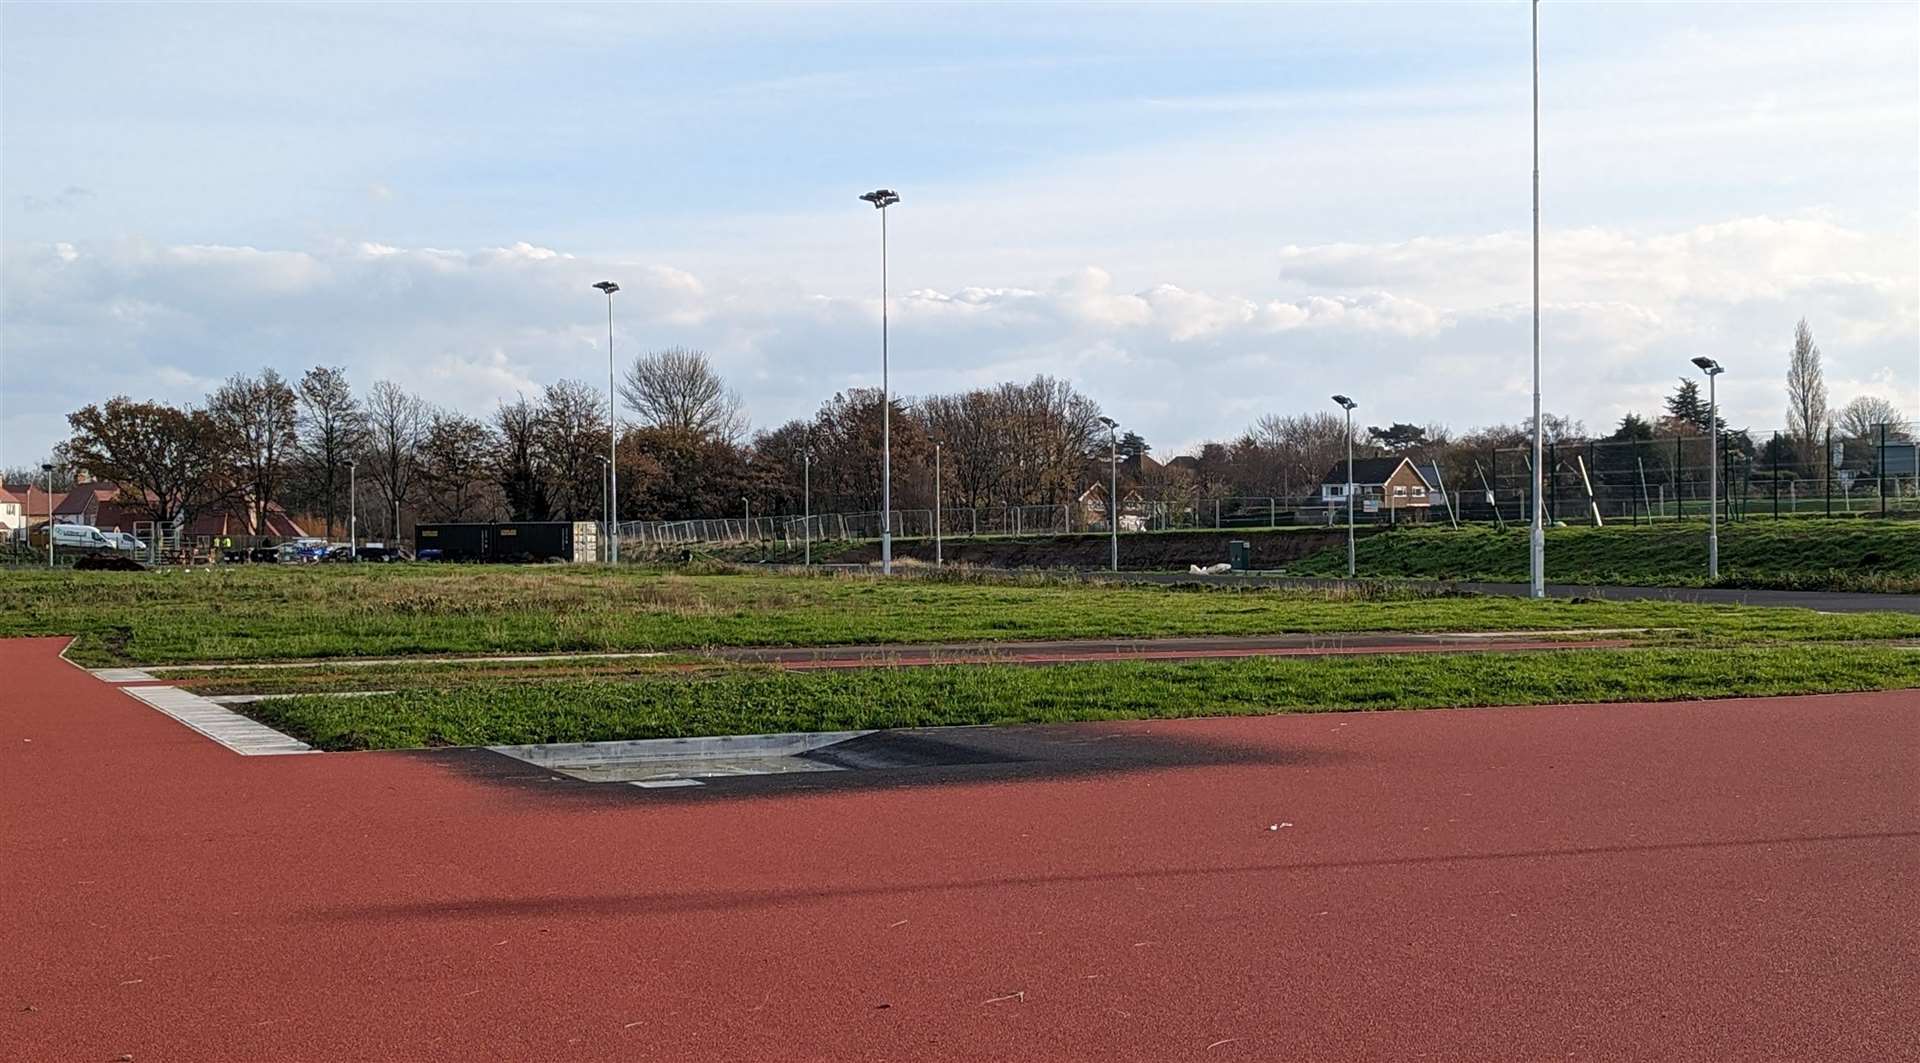 Work on the long-awaited athletics track at Three Hills in Folkestone has been halted